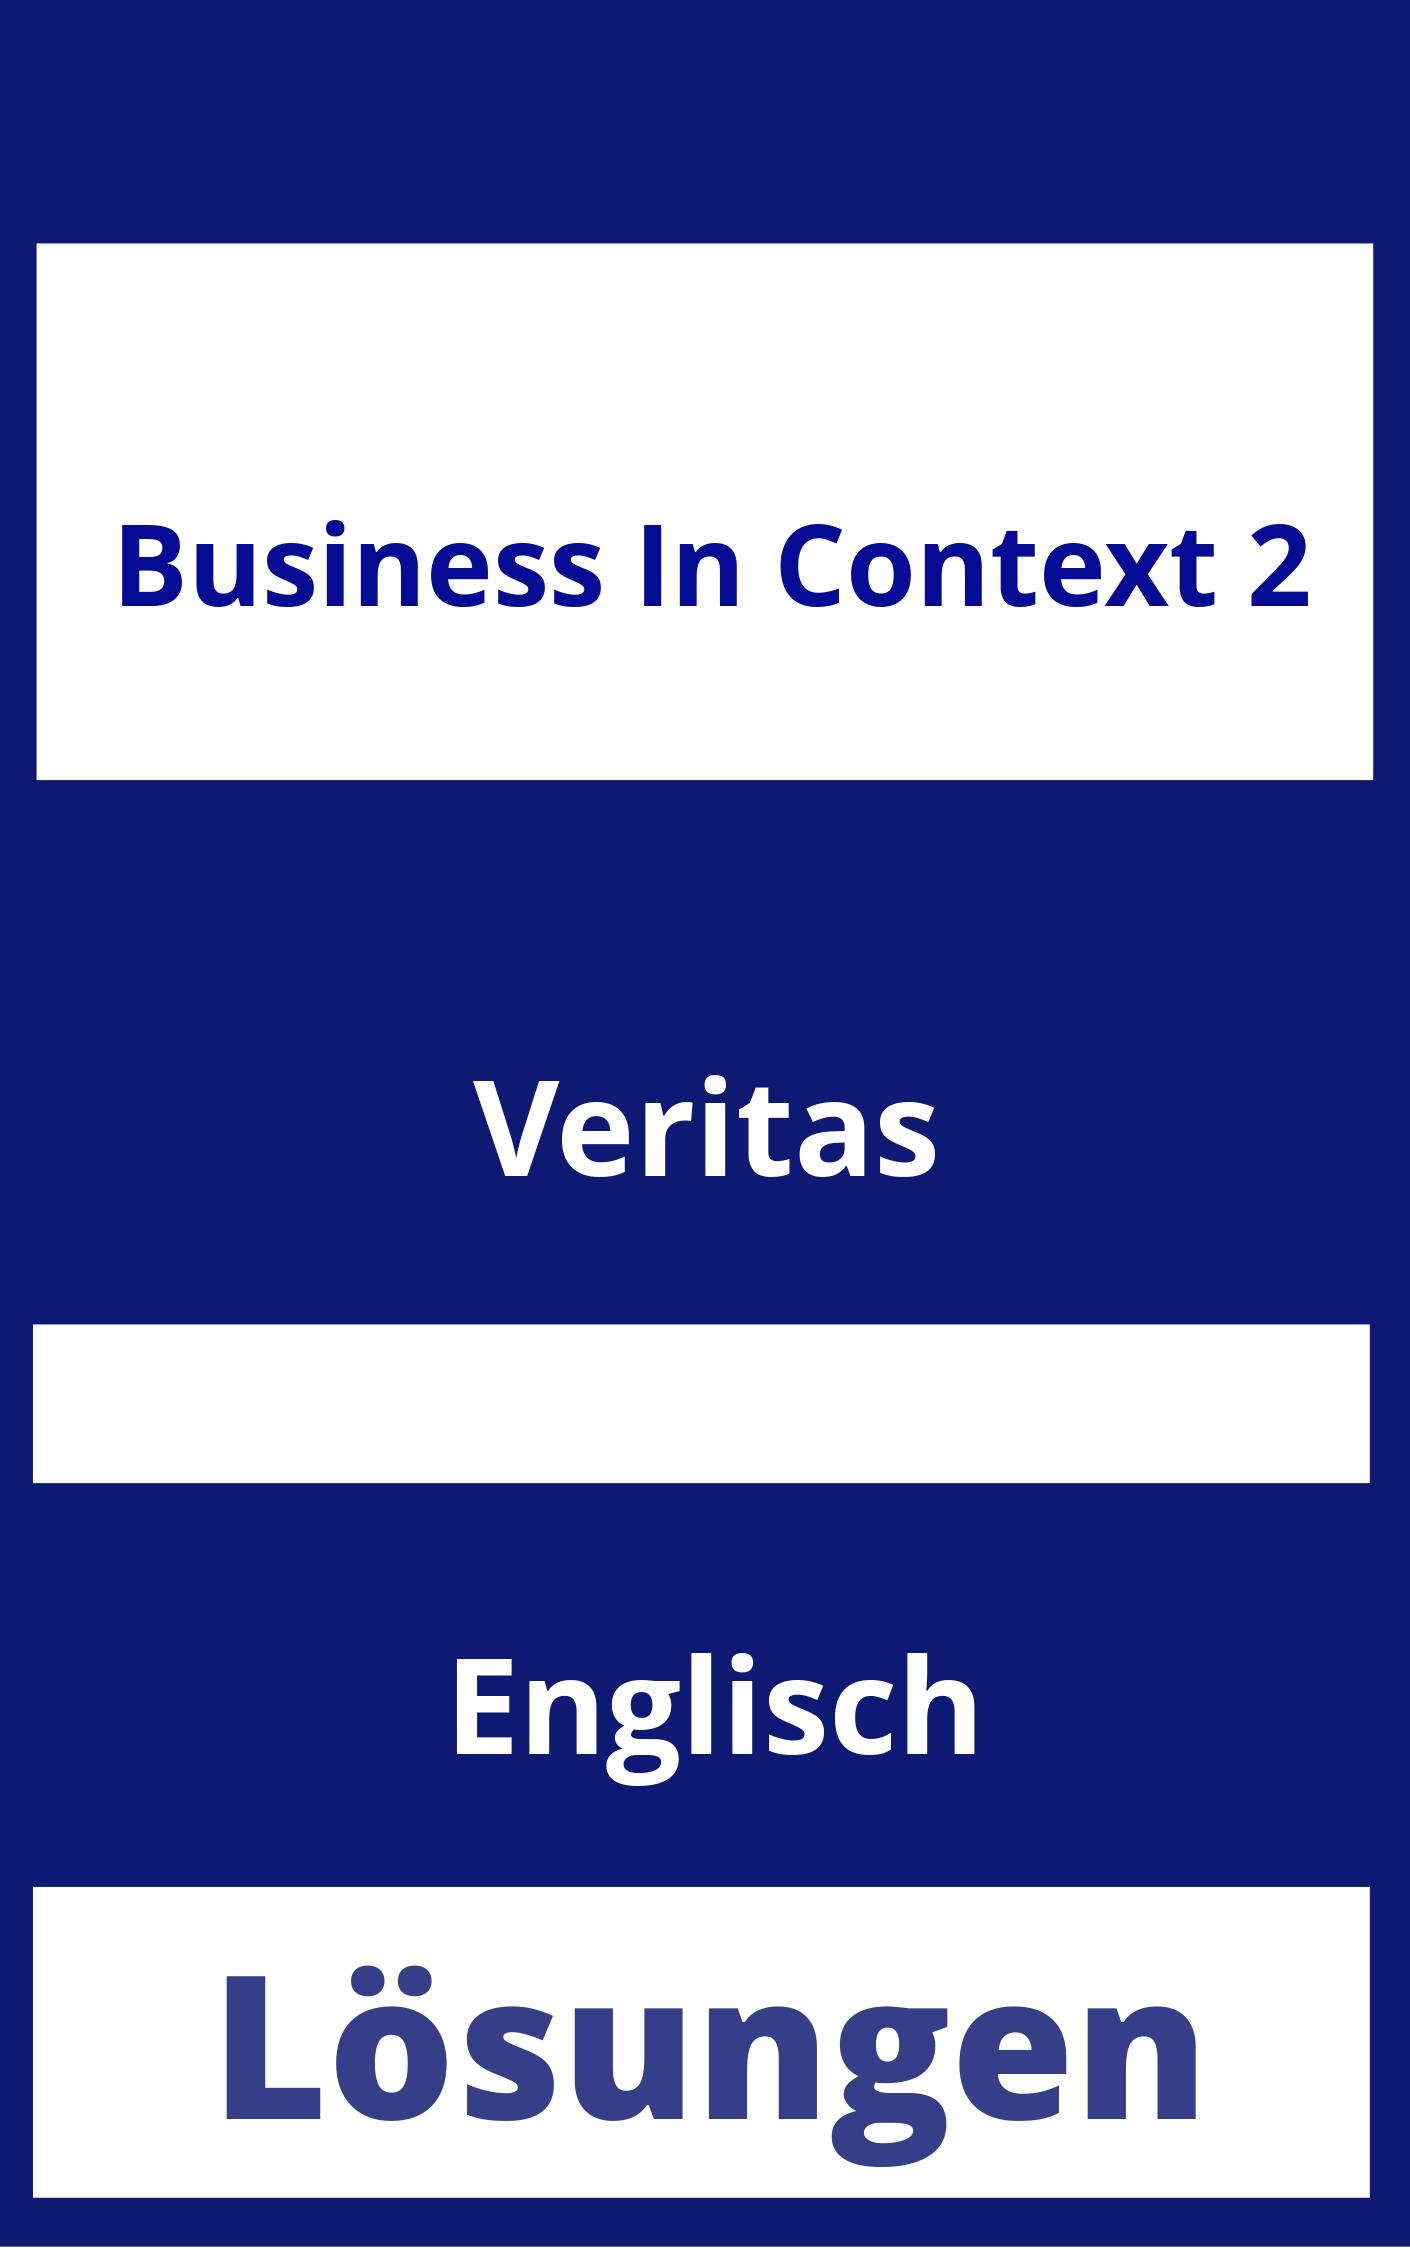 Business in context 2